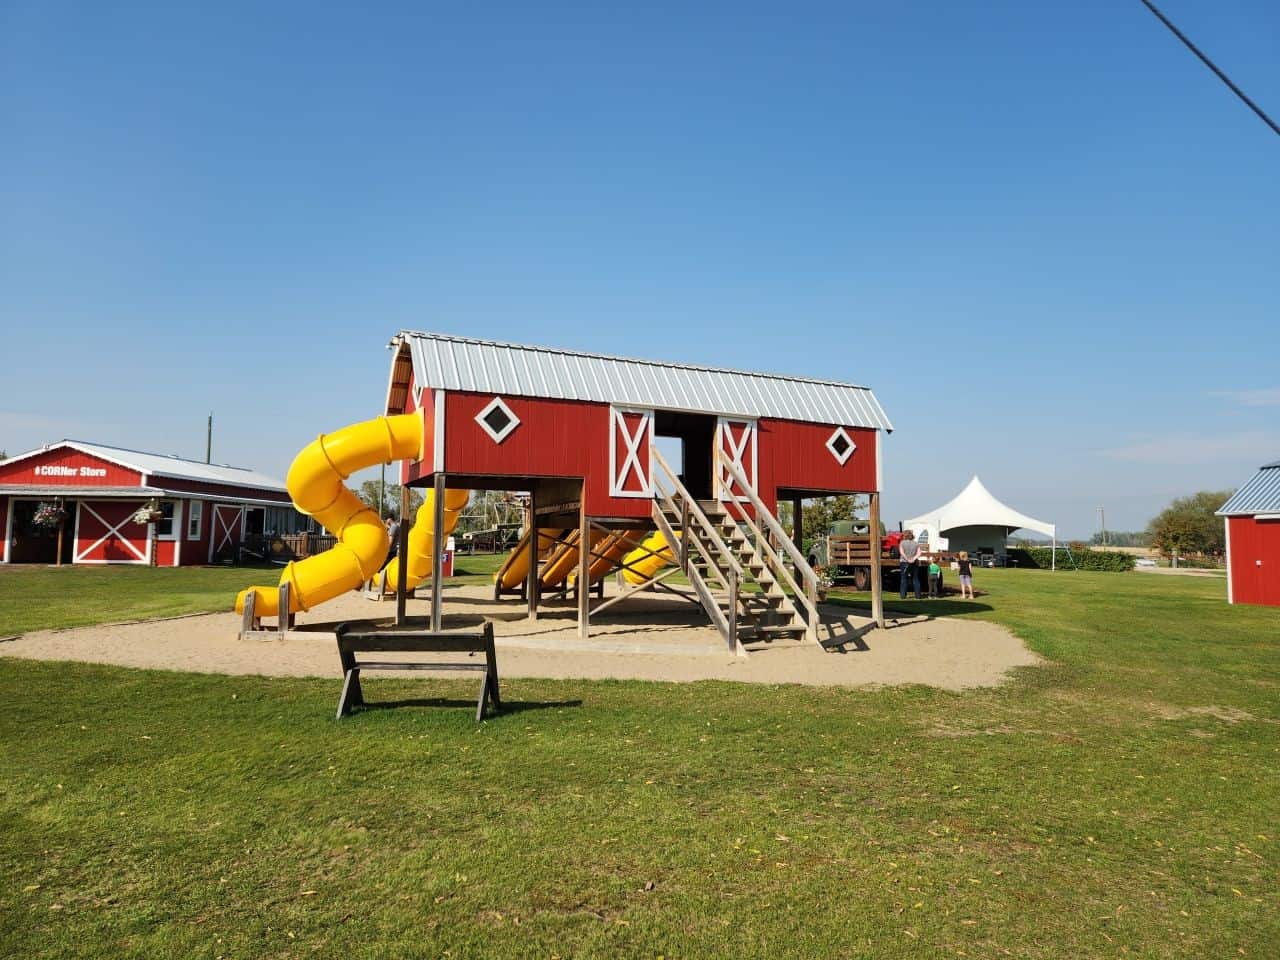 The amount of activities available at Kraay Family Farm in Lacombe will surprise you. Give yourself lots of time to enjoy this awesome petting Zoo and fun Farm in Alberta North of Calgary.